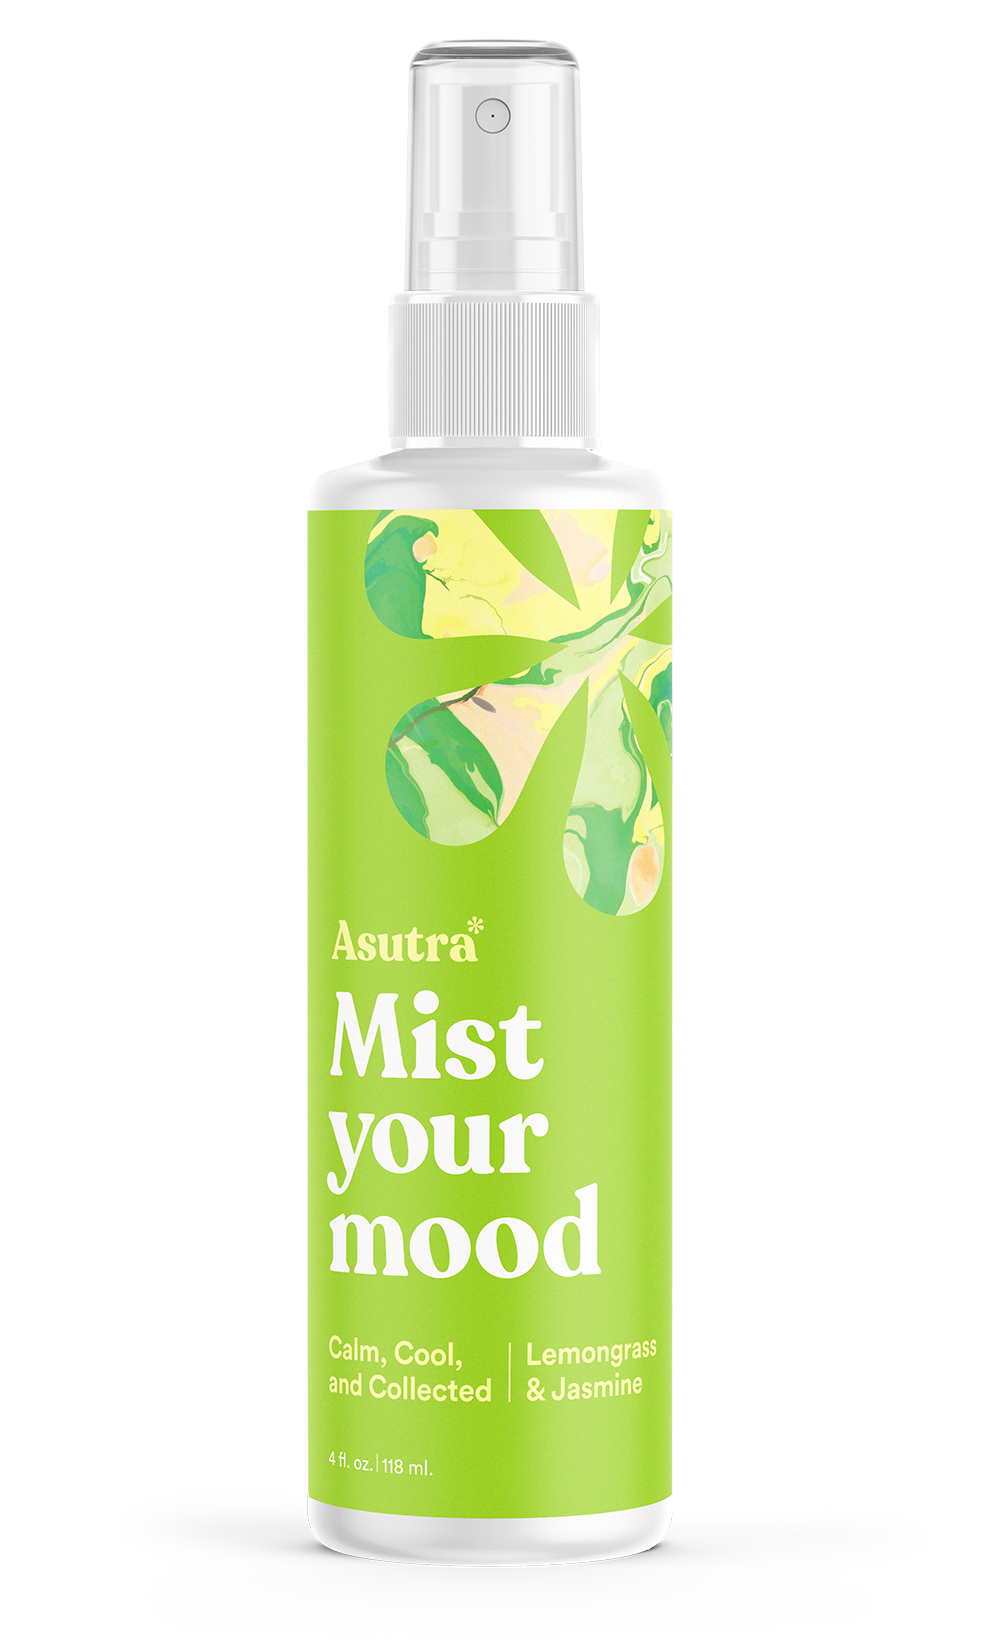 Calm, Cool, and Collected Aromatherapy Mist